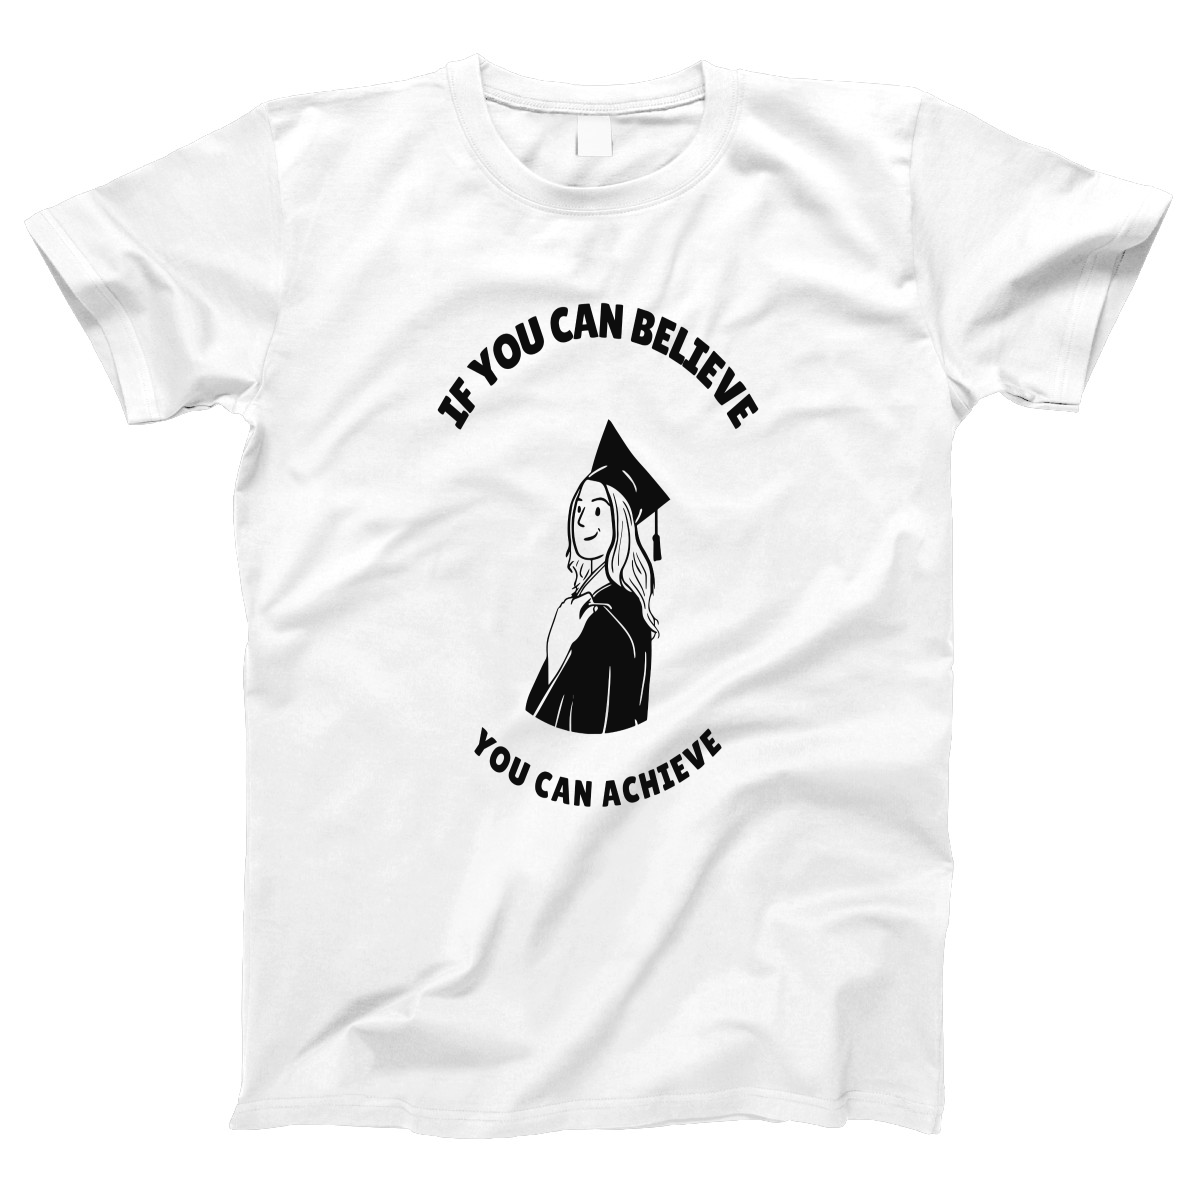 If You Can Believe You Can Achieve Women's T-shirt | White